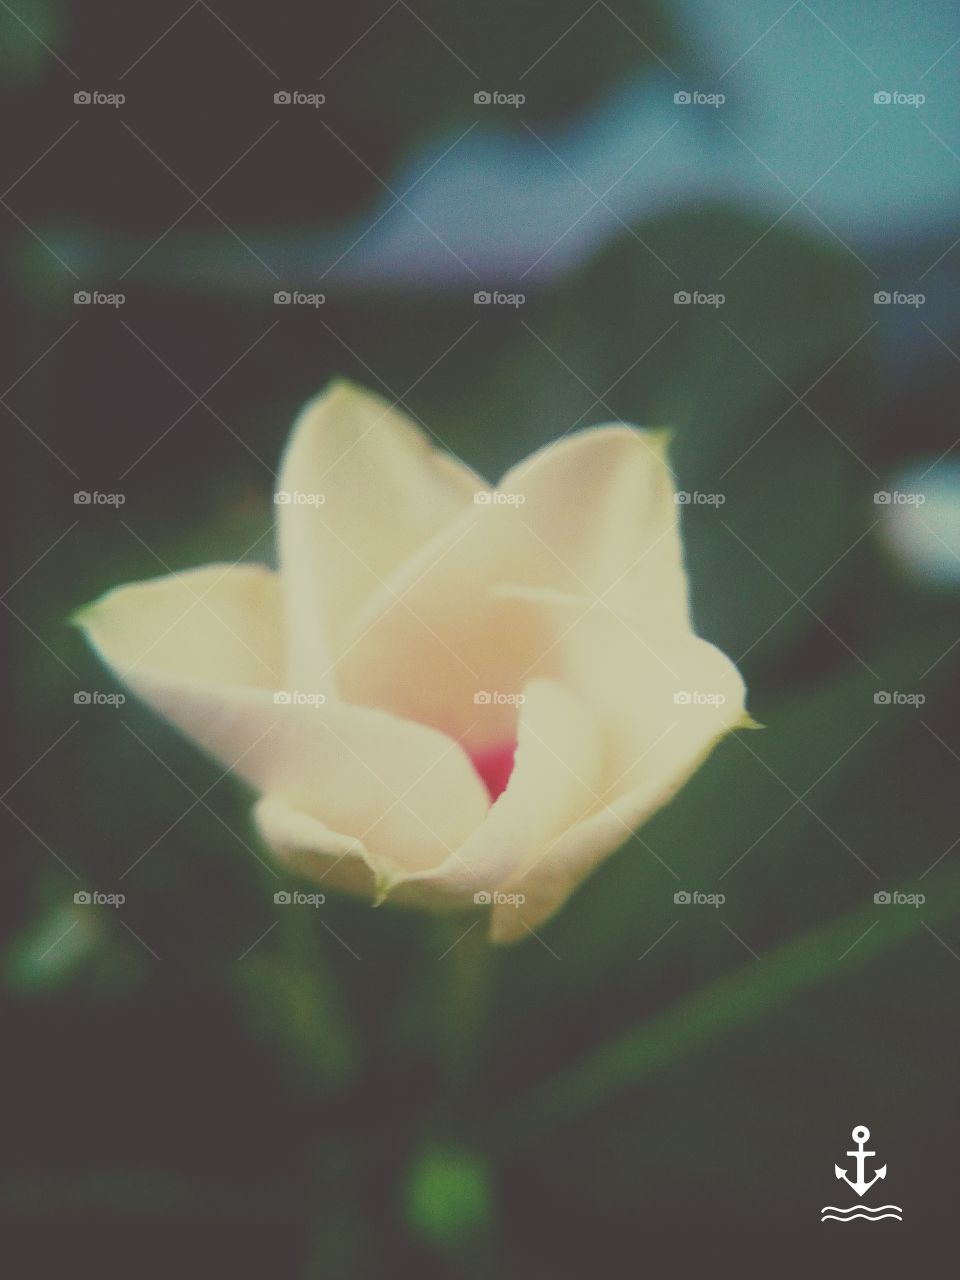 Micro lens, capturing a gorgeous View of a blossoming Flower.